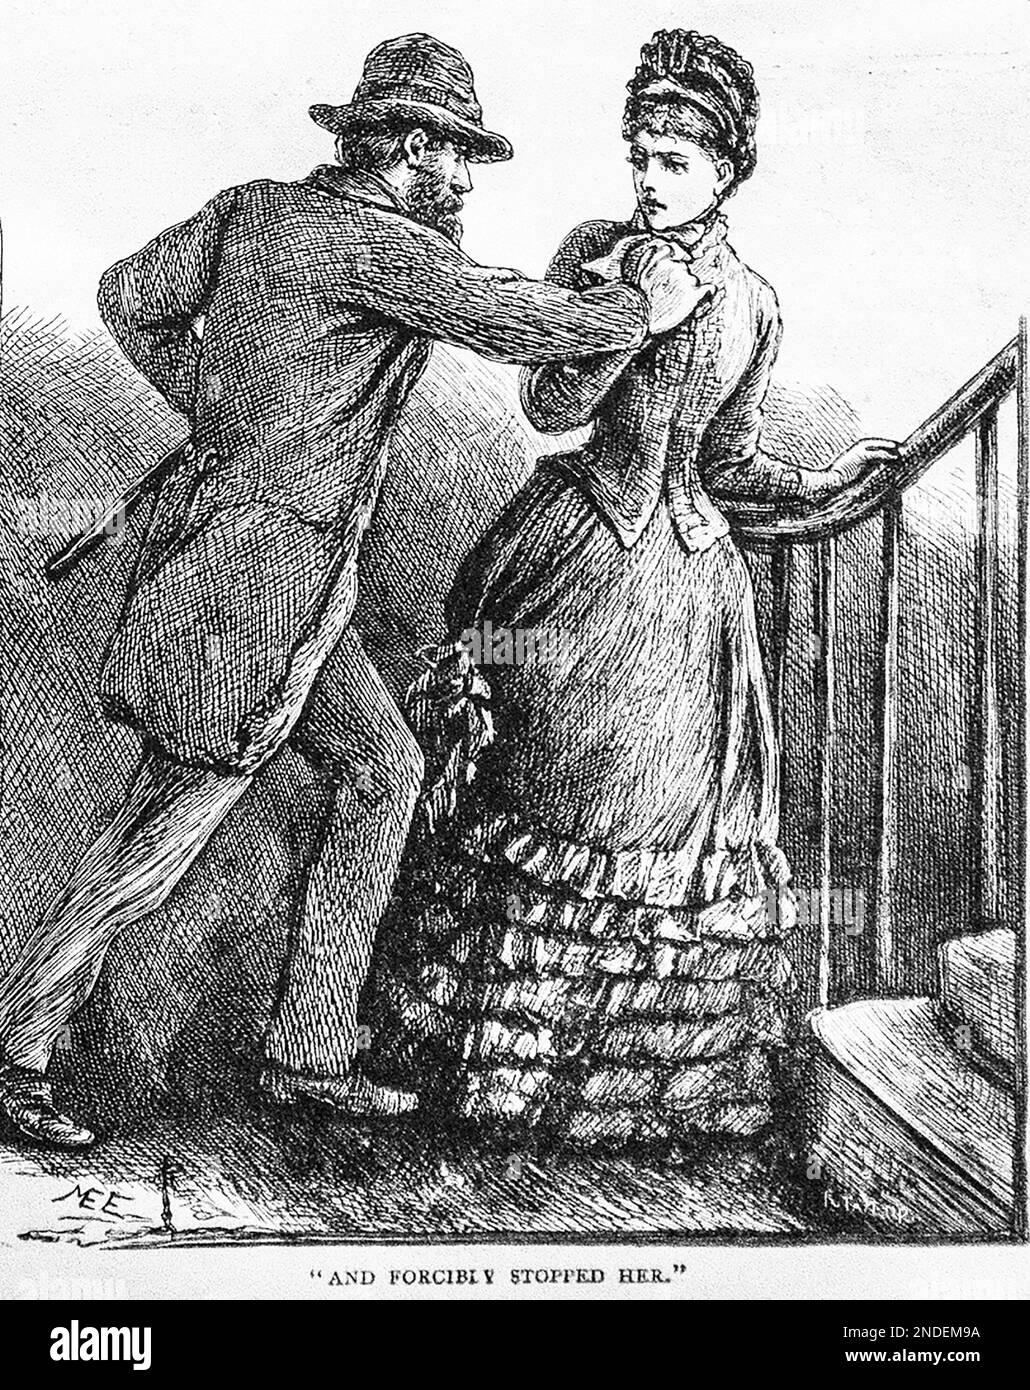 A 19th sketch of a man behaving aggressively towards a woman and appearing to restrain her entitled, ‘and forcibly stopped her’ from the Girls Own Paper of 1887. Stock Photo